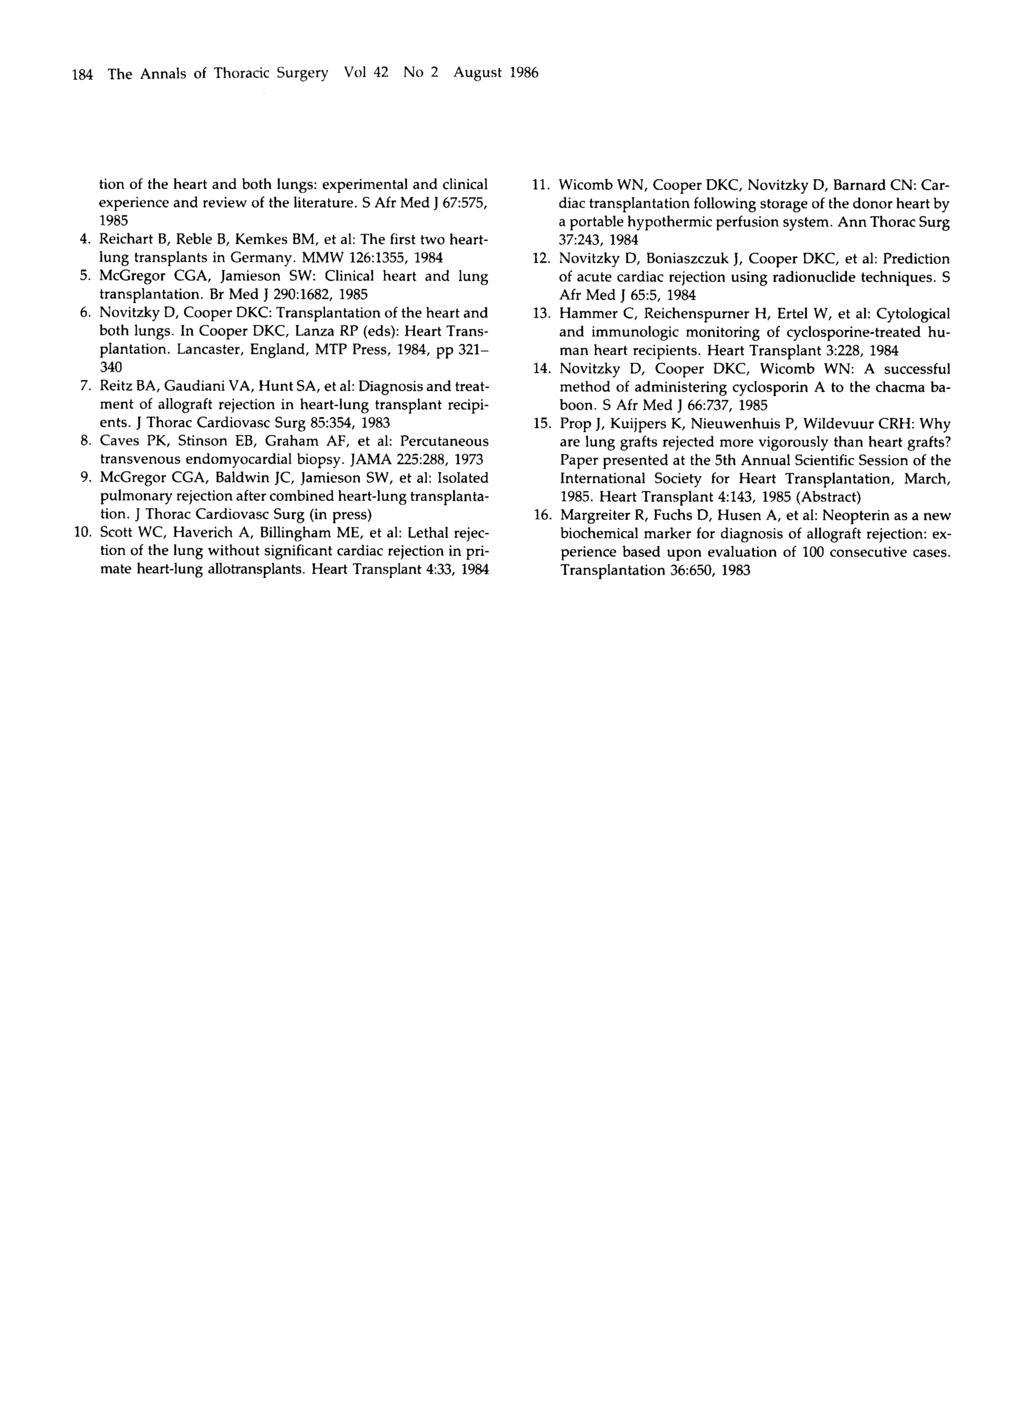 1% The Annals of Thoracic Surgery Vol 42 No 2 August 1986 tion of the heart and both lungs: experimental and clinical experience and review of the literature. S Afr Med J 67:575, 1985 4.